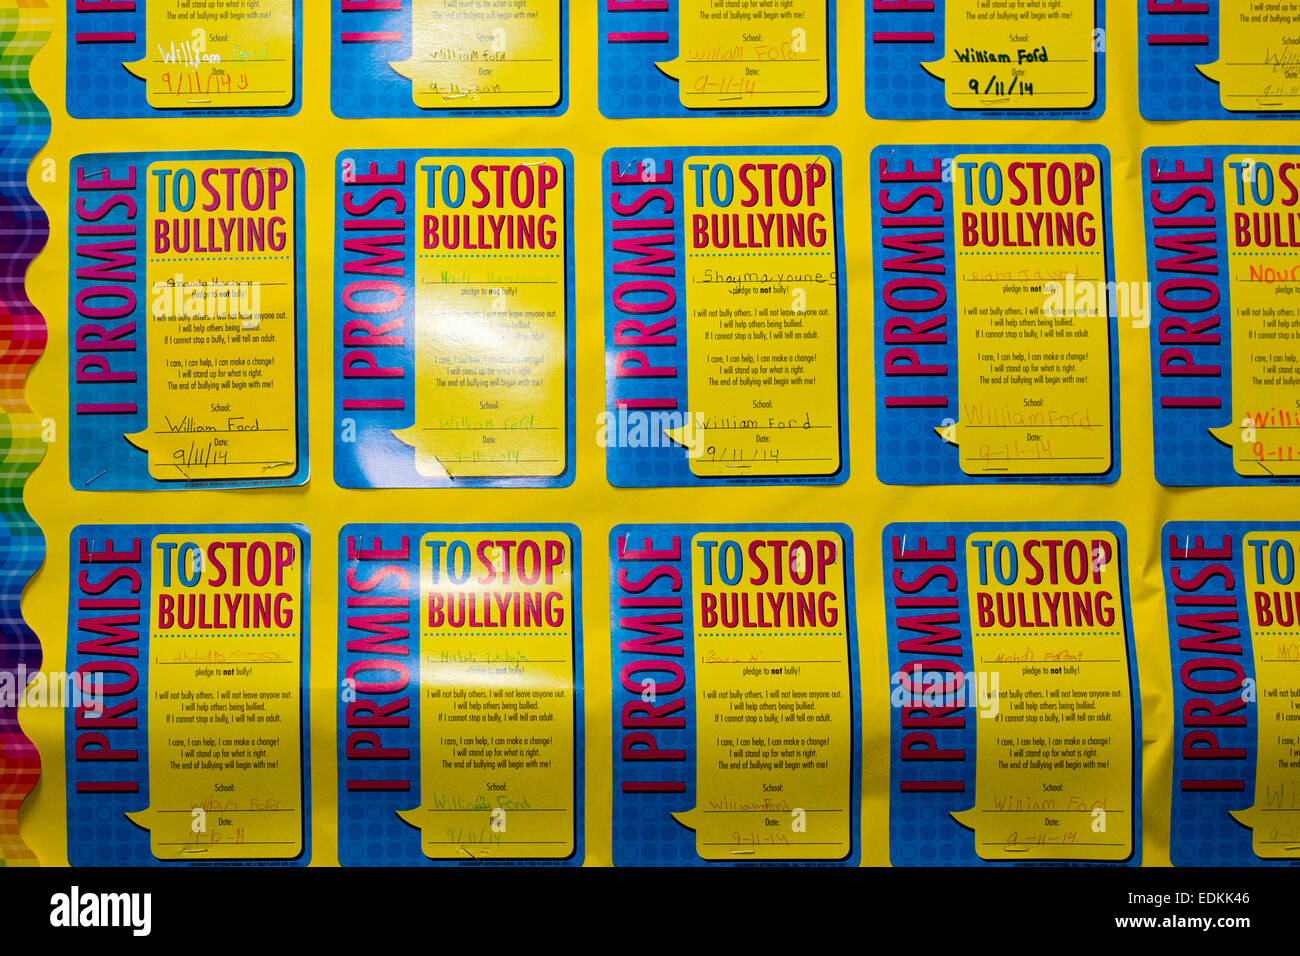 Dearborn, Michigan - Anti-bullying promises on the wall at William Ford Elementary School. Stock Photo